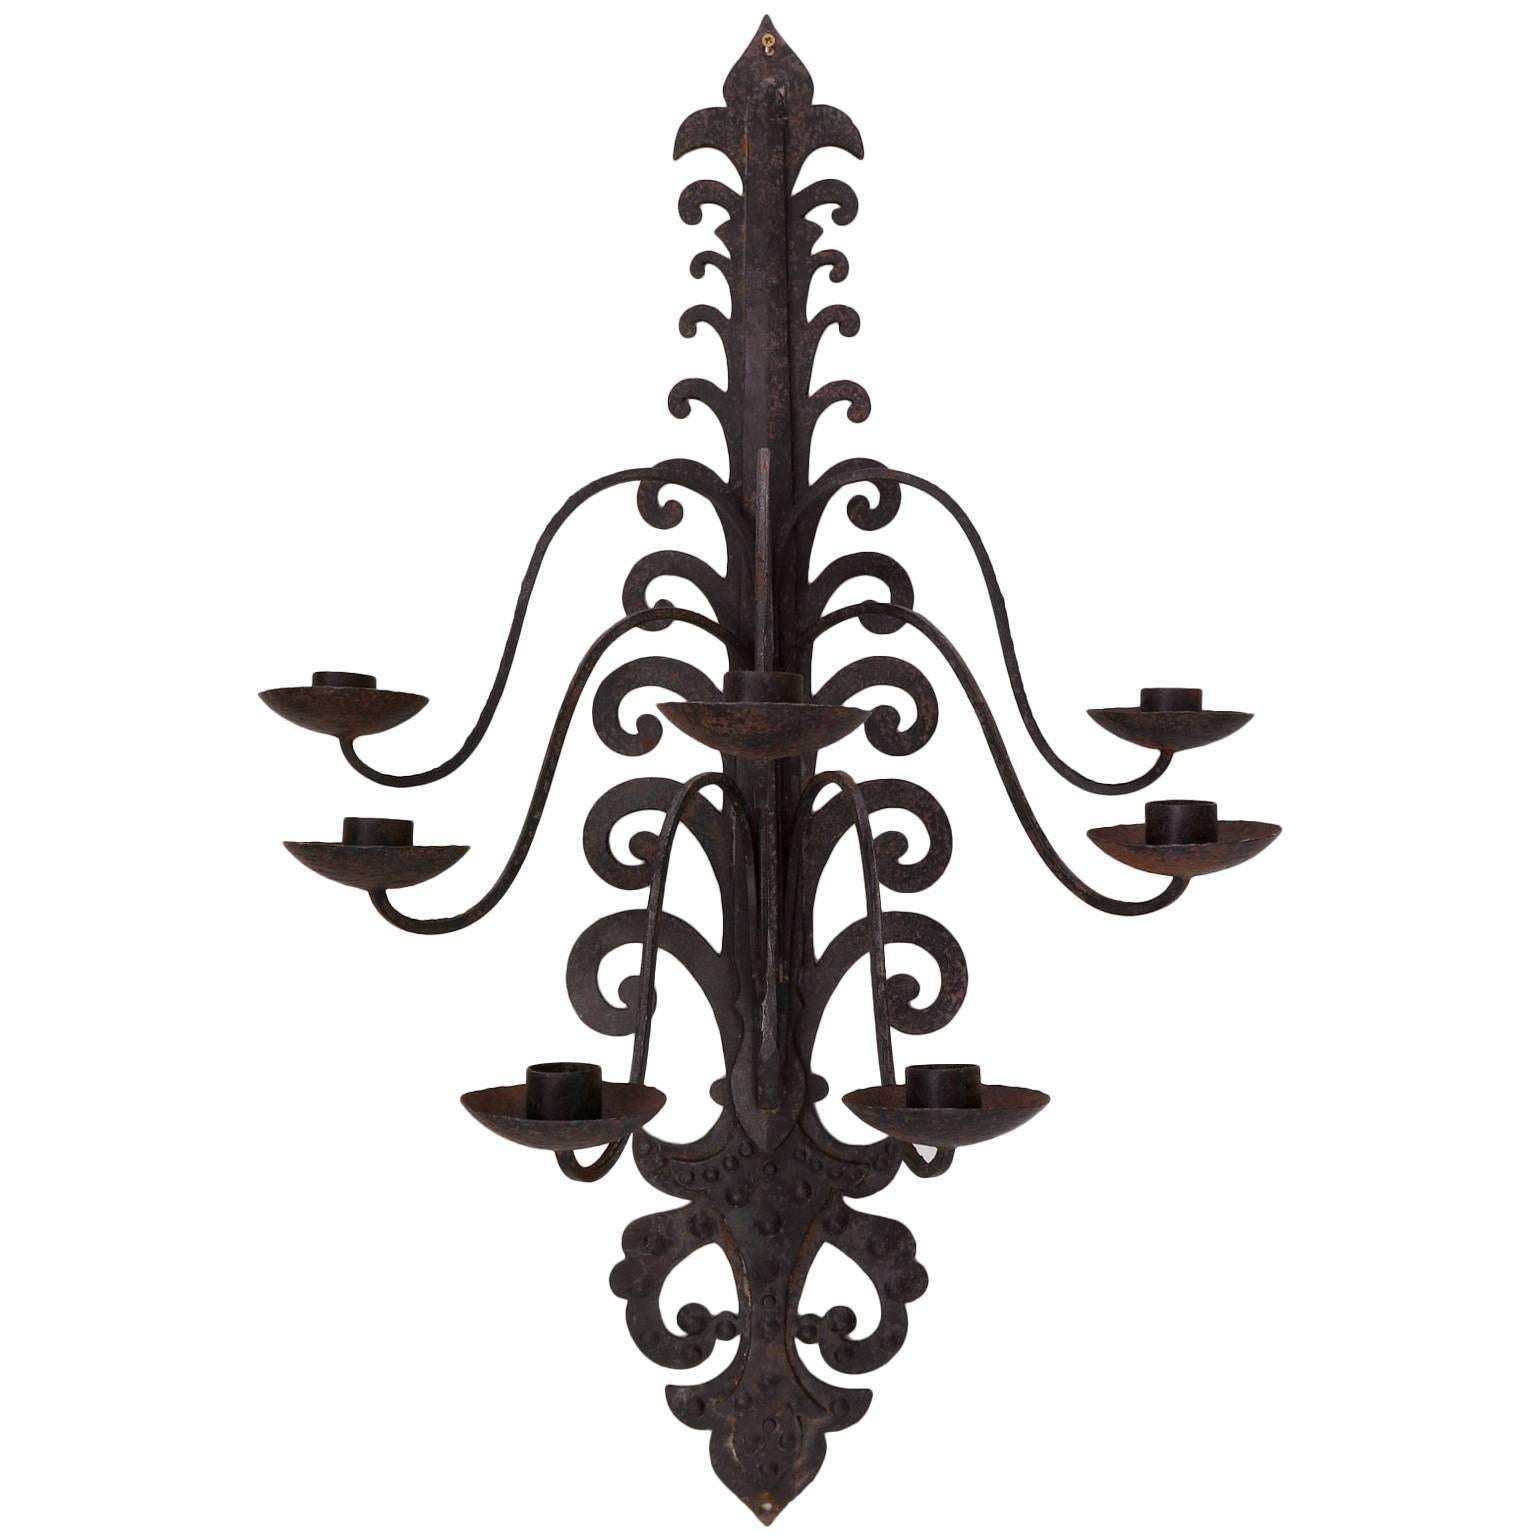 Seven Large Baroque Style Iron Sconces, France, 1940s